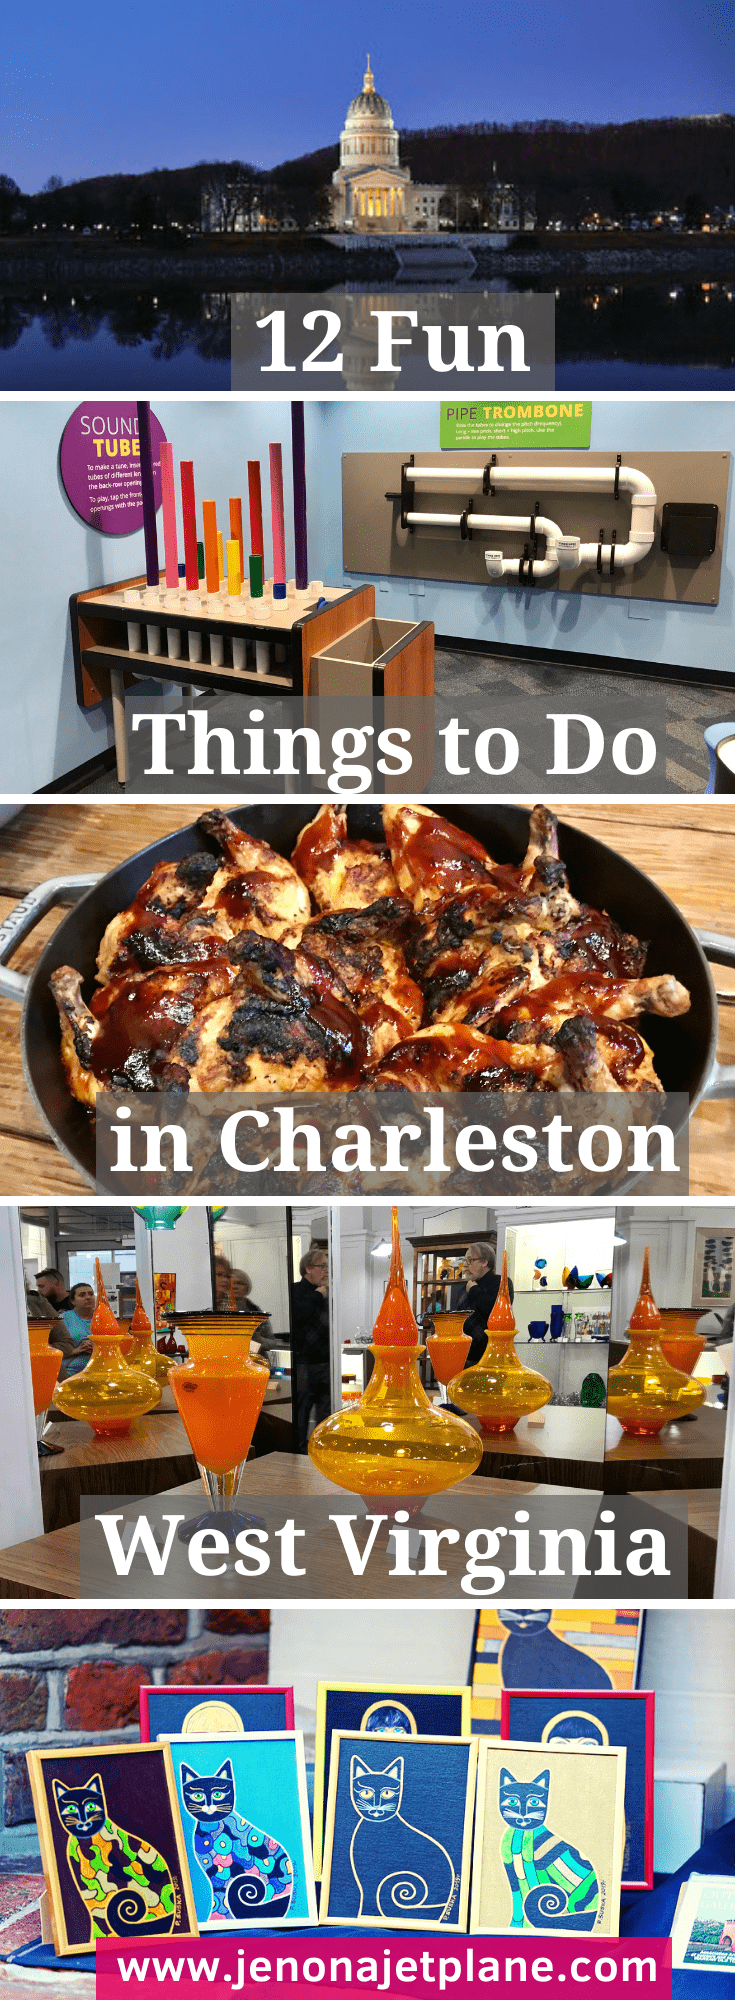 West Virginia's capital city is a hidden gem. Here's 12 fun things to do in Charleston, WV! #westvirginia #charlestonwestvirginia #charlestonwv #visitwestvirginia